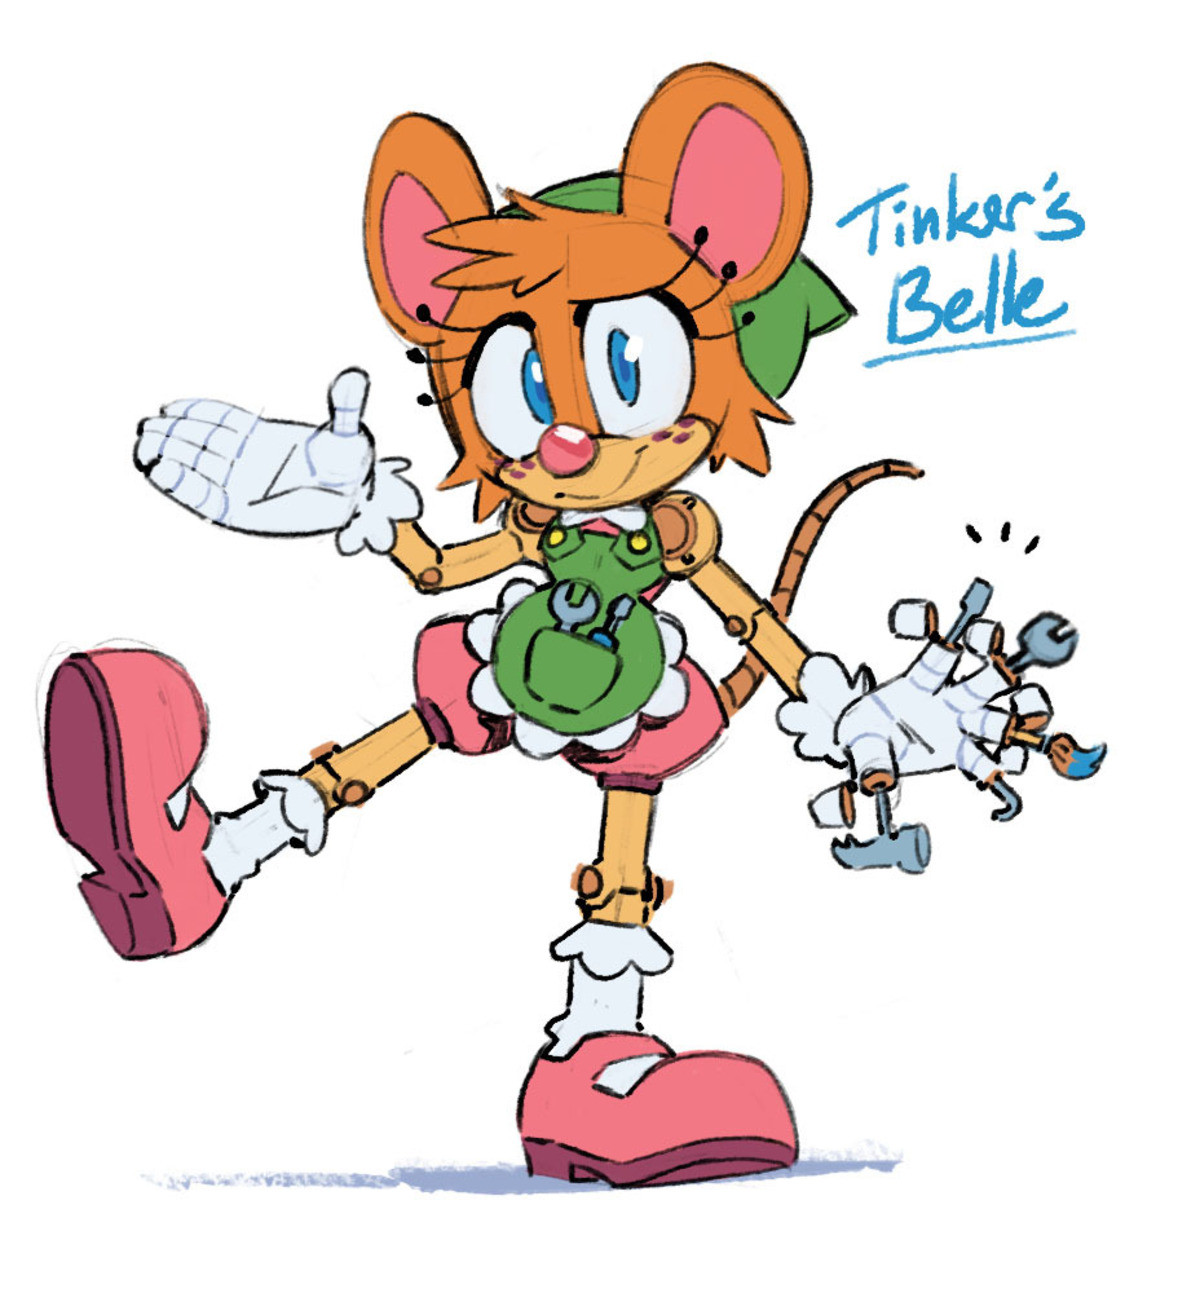 Tinker's Belle. .. Cute, but she doesn't need the mouse ears, she's perfect just as she is